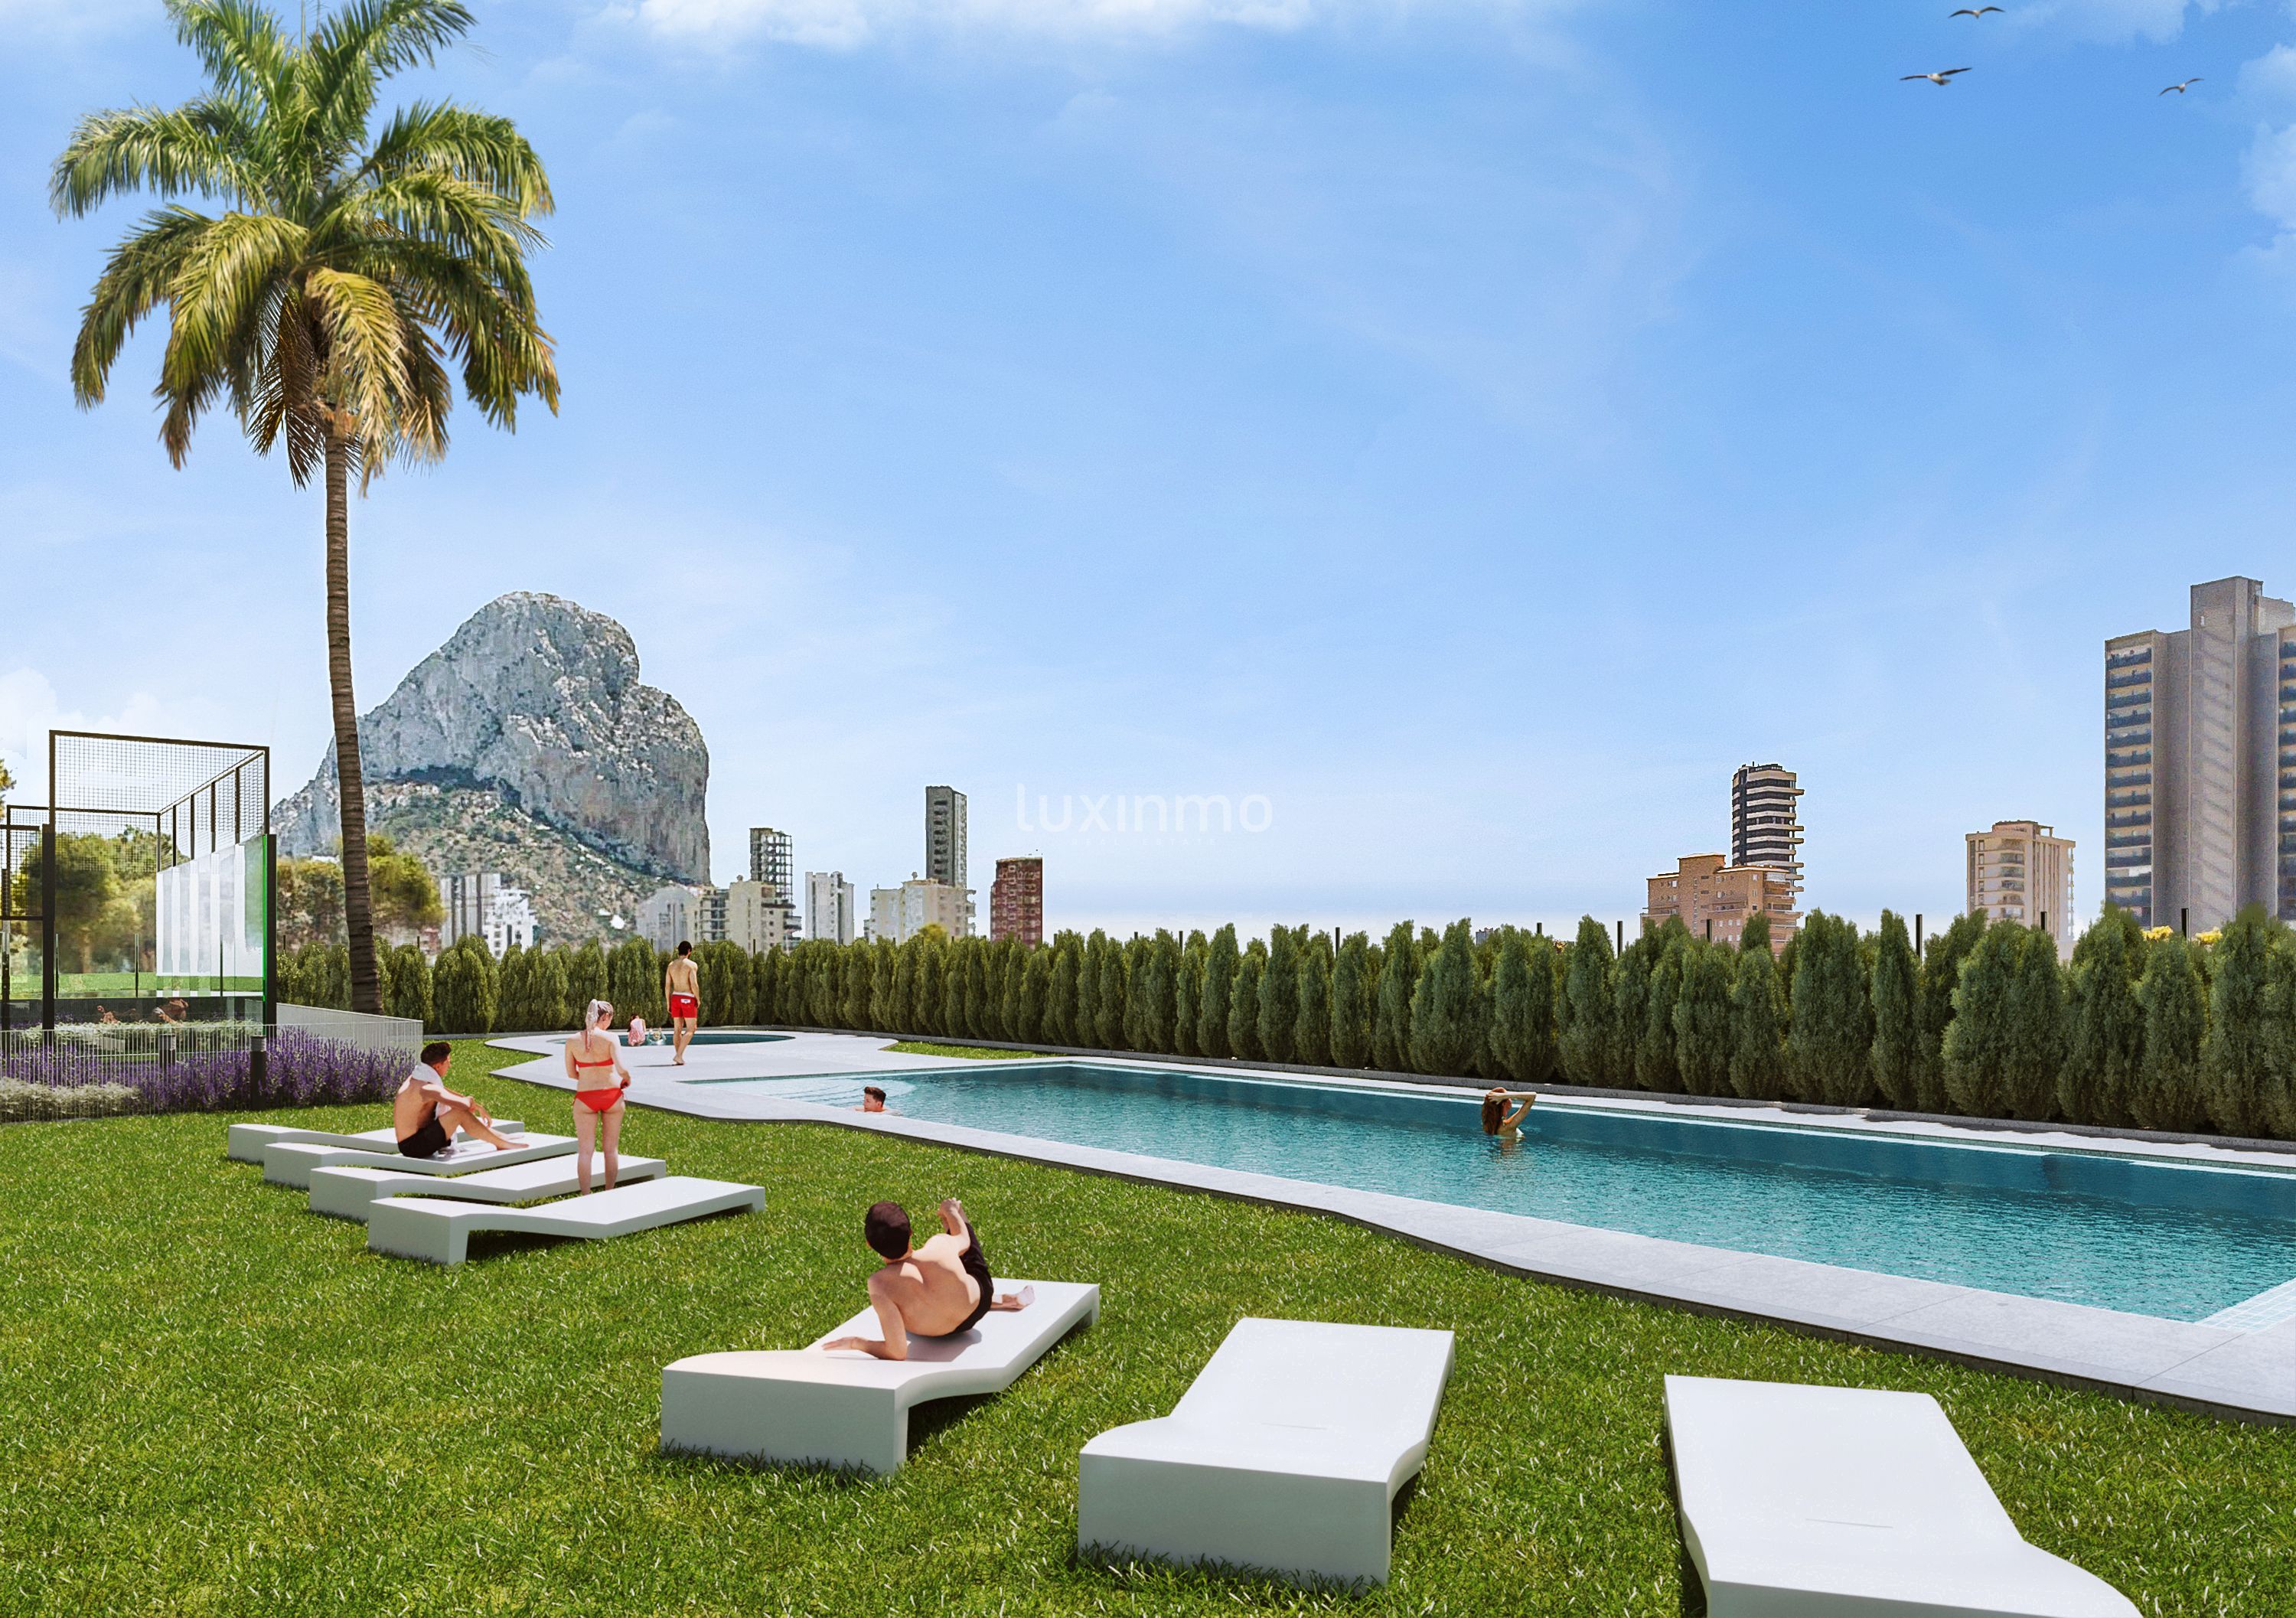 Apartment for sale in Calpe 17